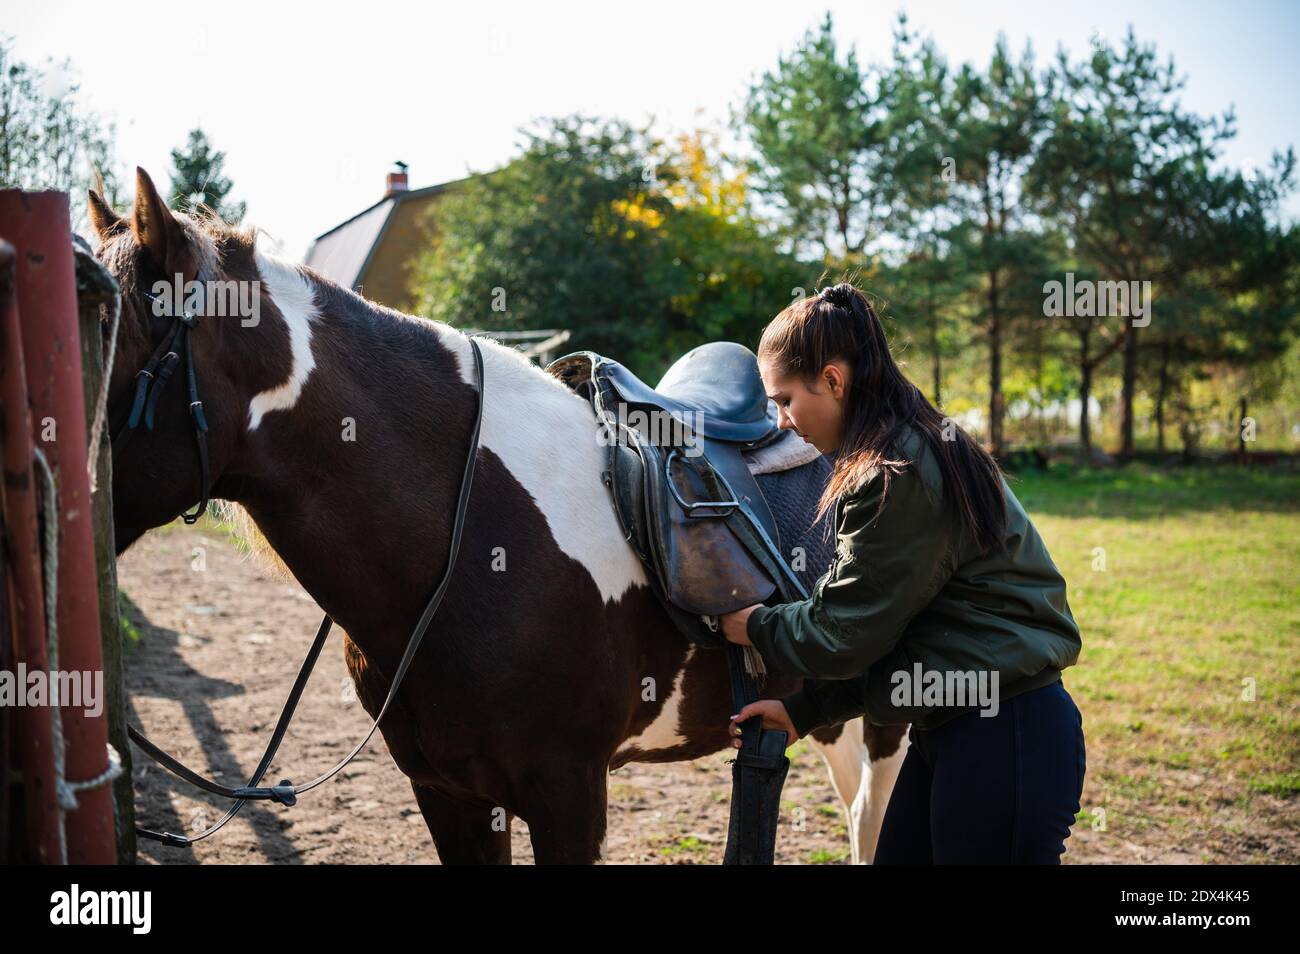 After a ride, the jockey unsaddles the horse next to the fence at the ranch. Stock Photo